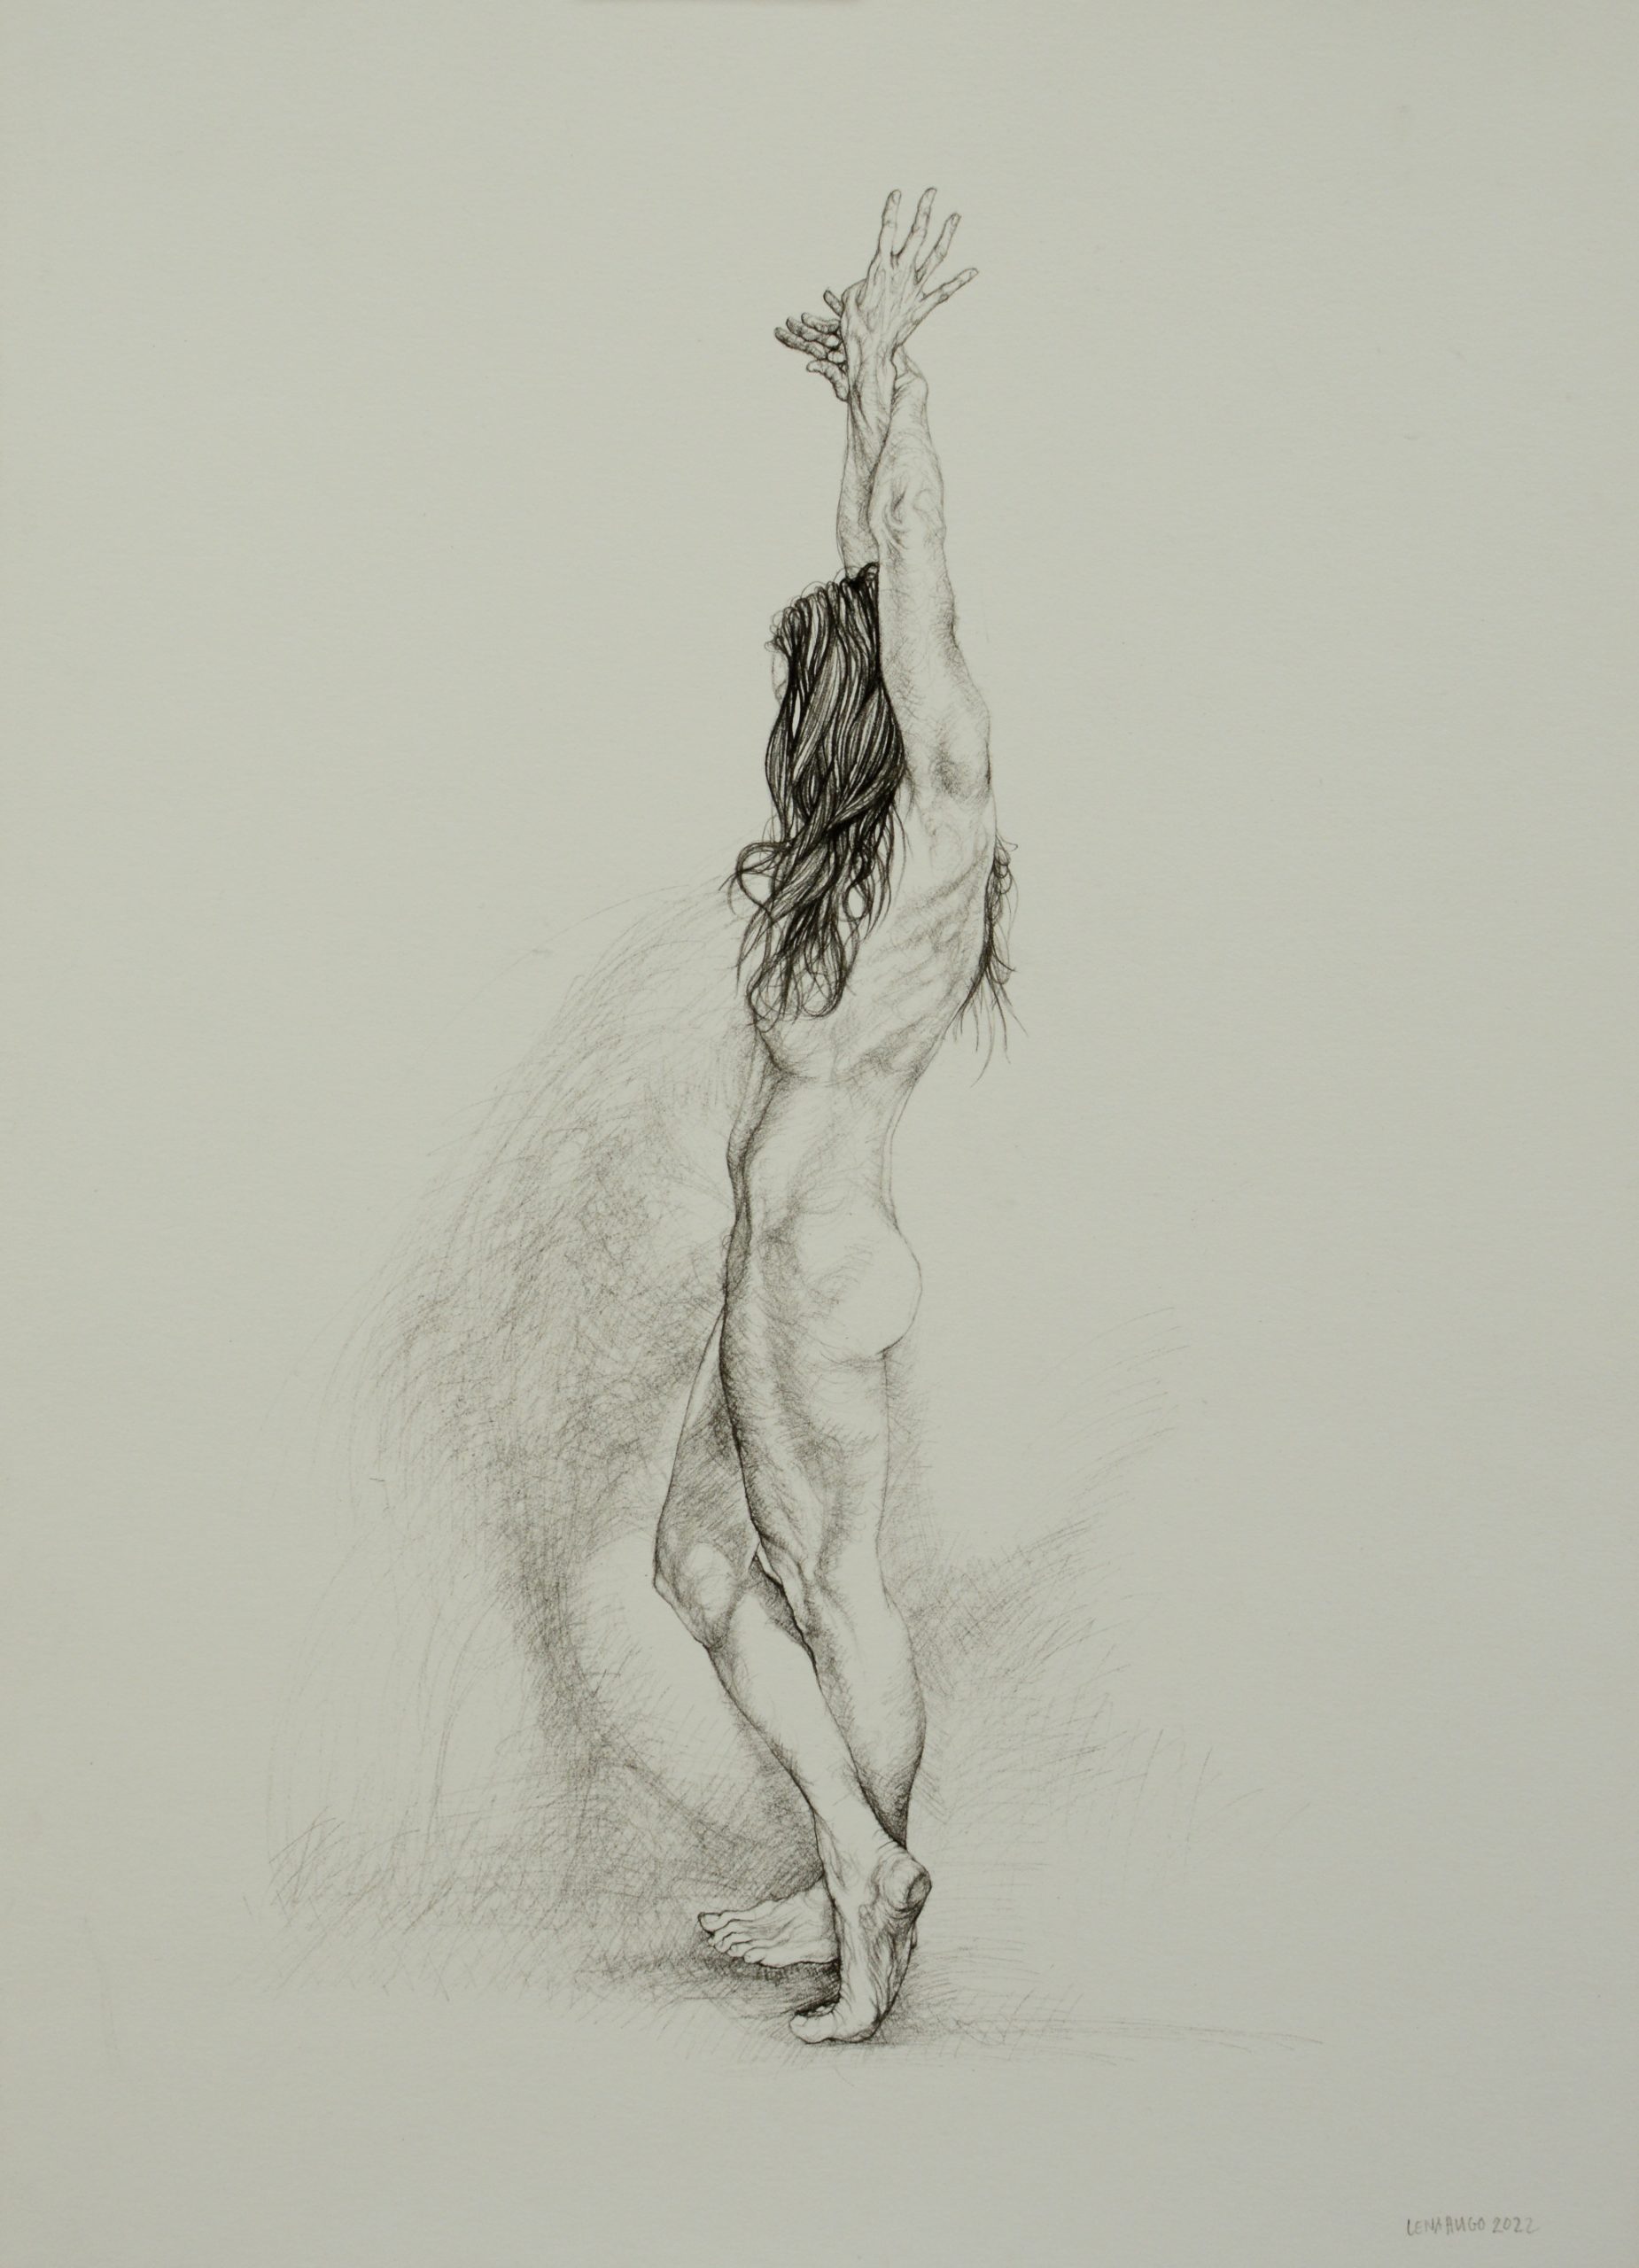 Pose as a Windswept Tree V, 42cm x 30cm, woodless charcoal on paper